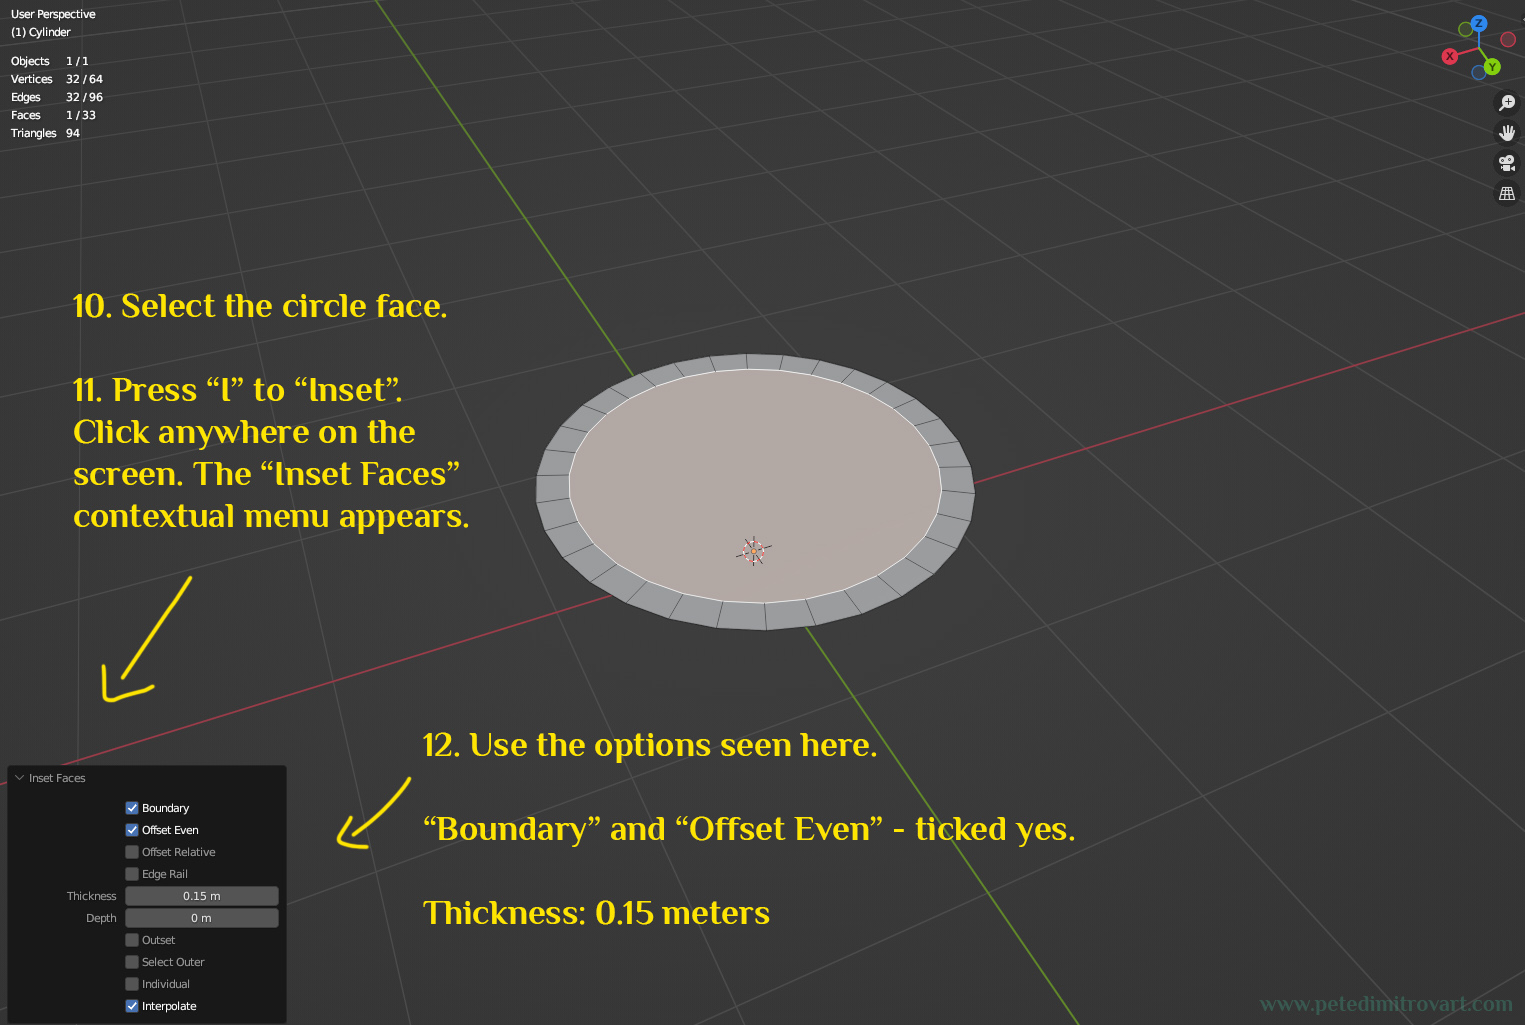 Blender screenshot. Shows the top circle face, everything else has been deleted after tha last step. “Inset Faces” command has been used to give the circle a ring loop of faces with 0.15 meters thickness. The image has a text that is transcribed in the paragraph above.